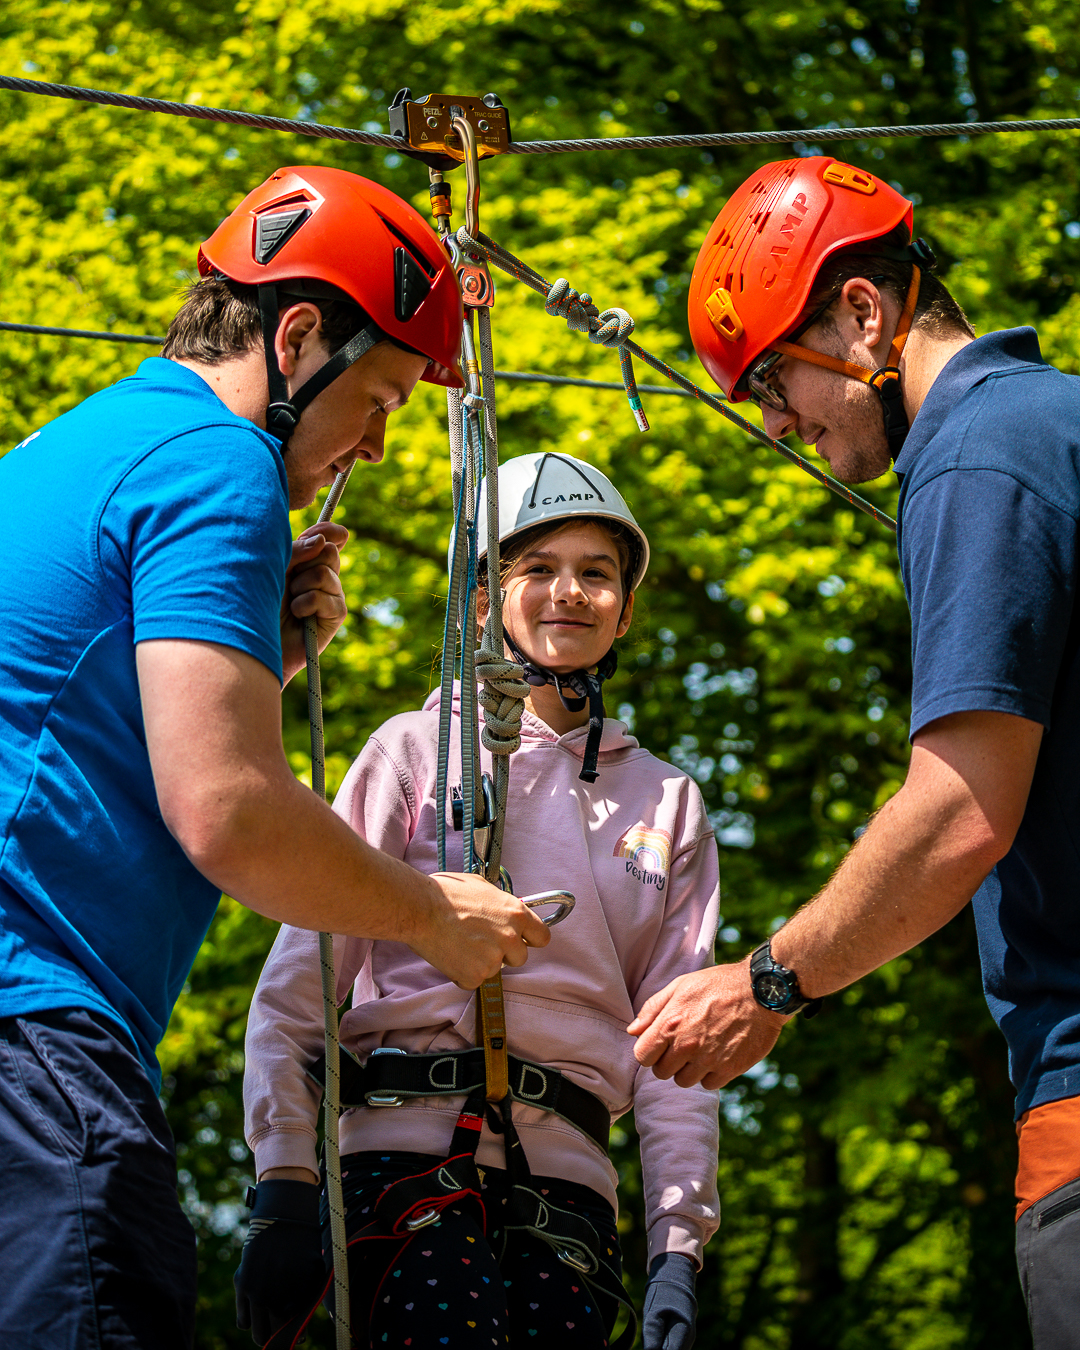 A girl in a pink sweatshirt smiles and looks towards the camera as two men in red helmets are attaching ropes and carabiners to her harness, with a Zipwire above them all.